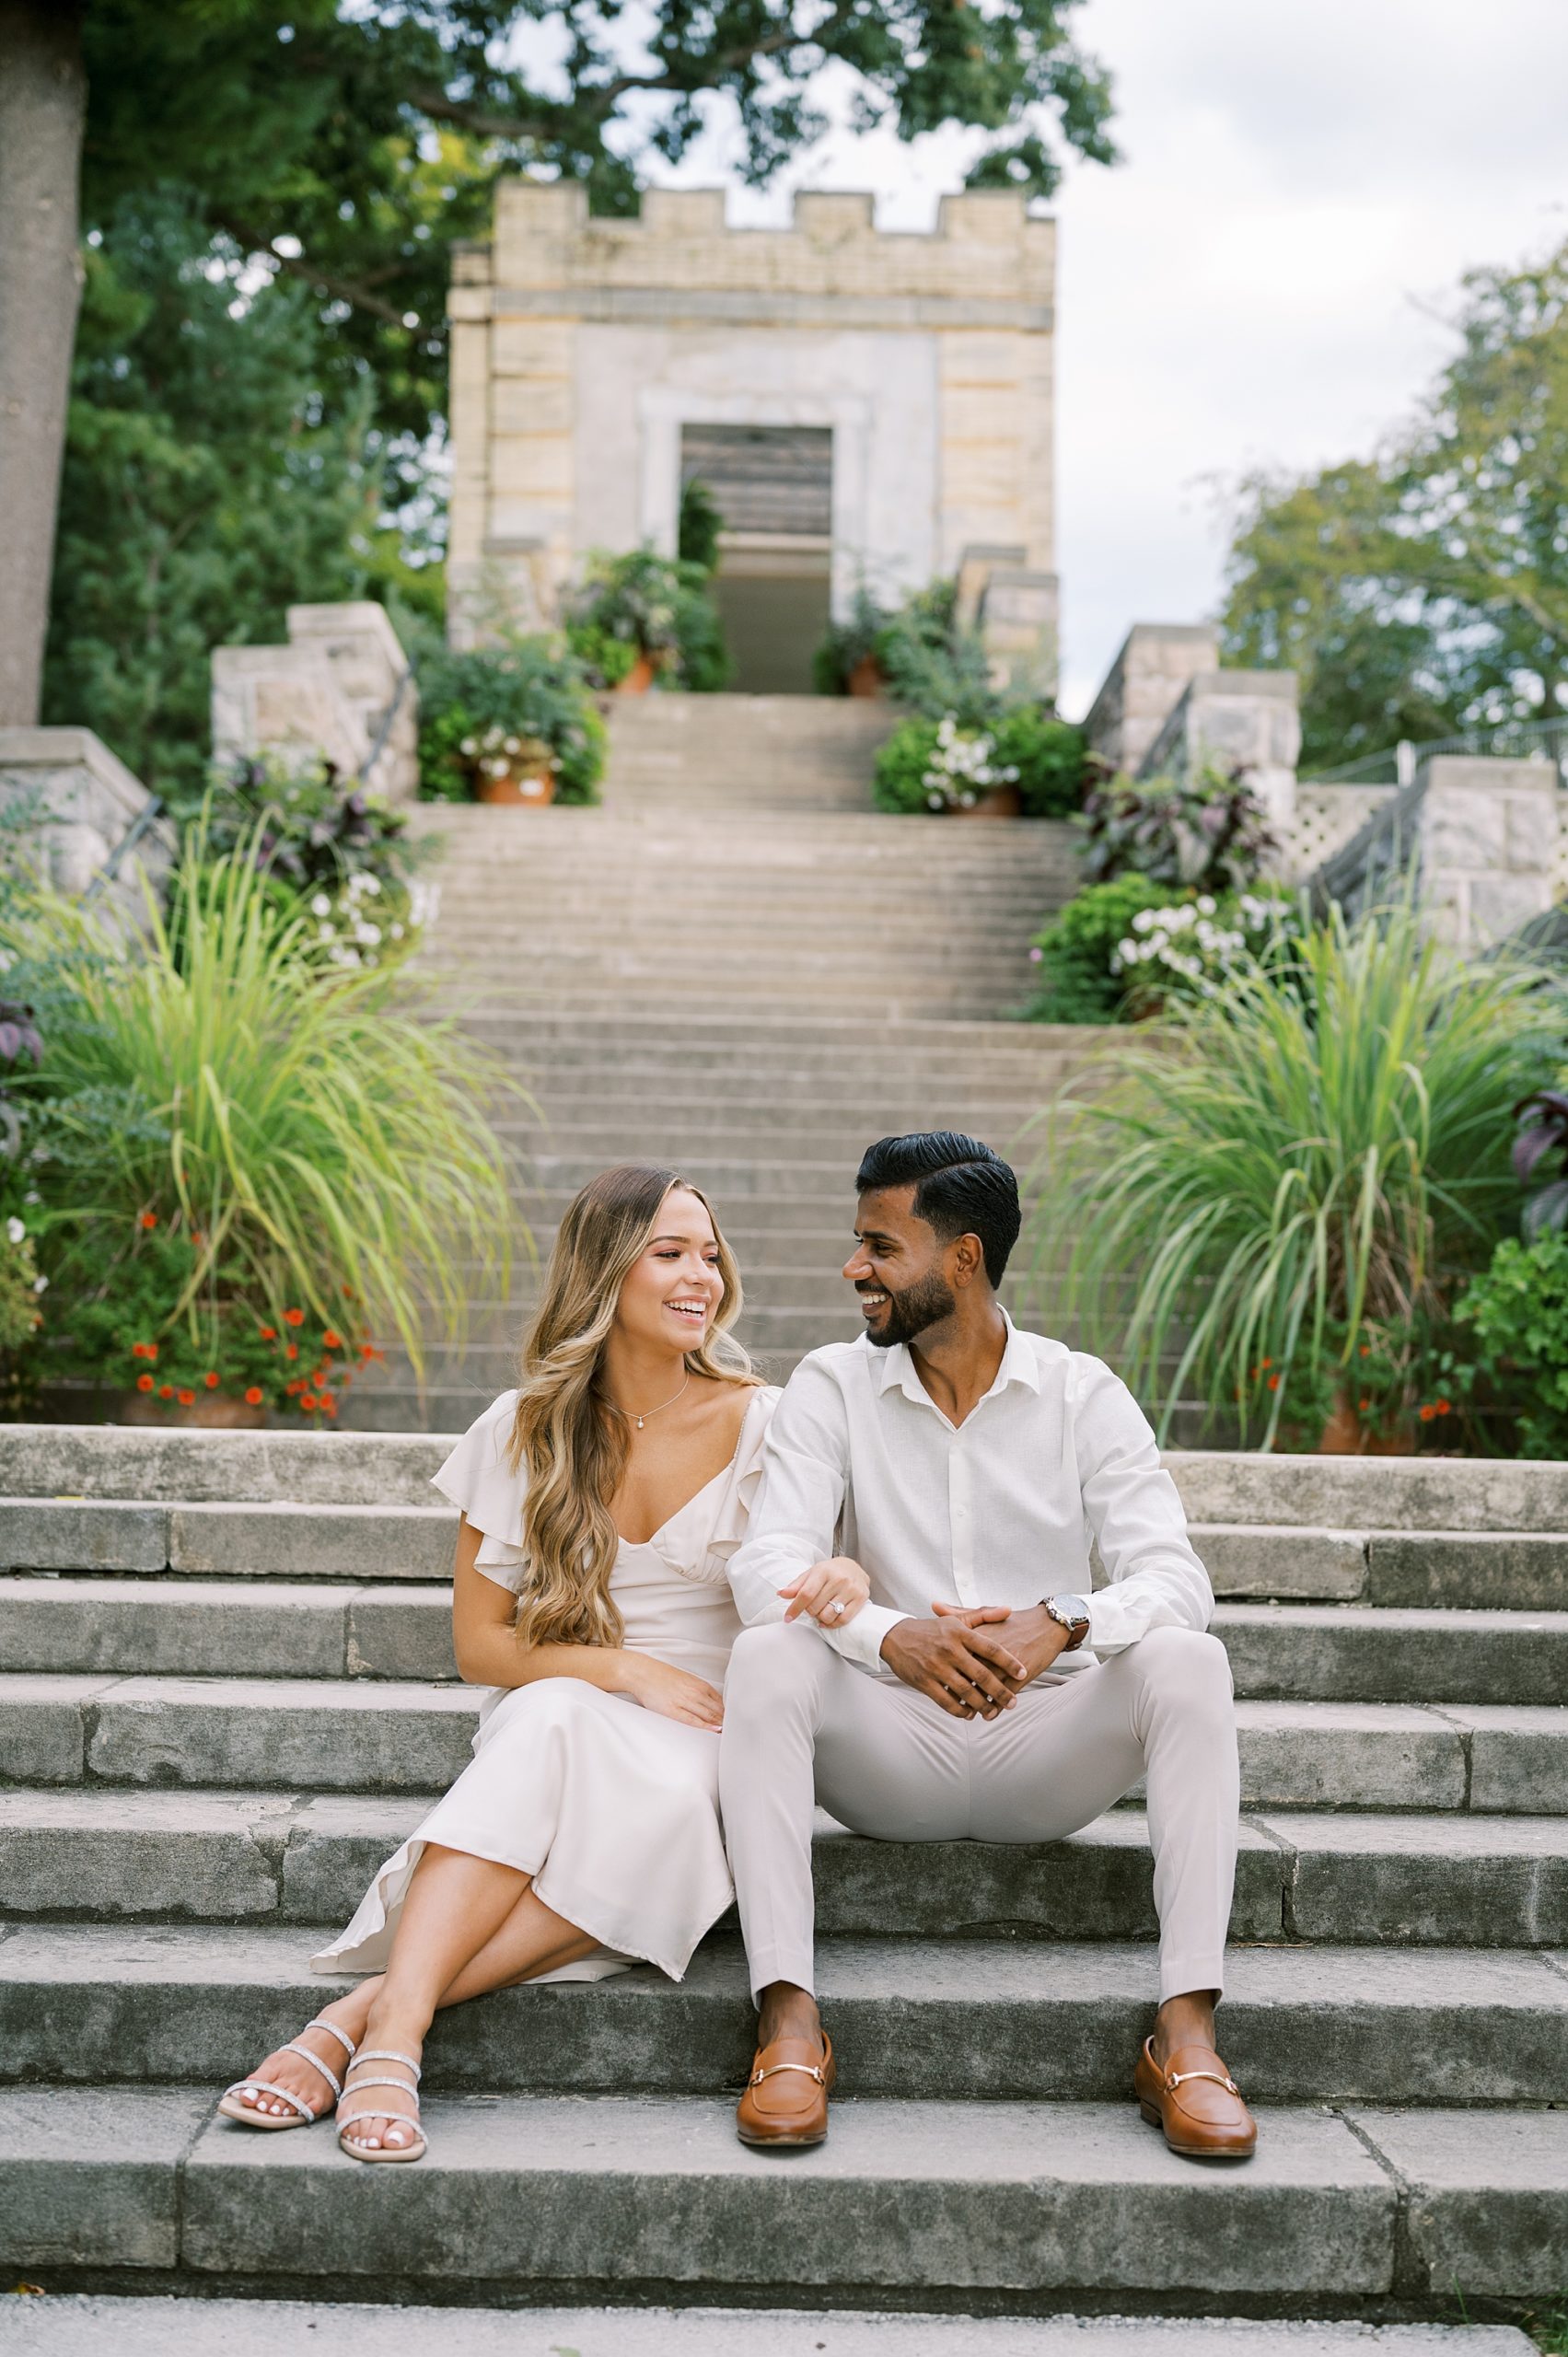 man and woman in white outfits sit on stone steps at Untemyer Gardens Conservancy